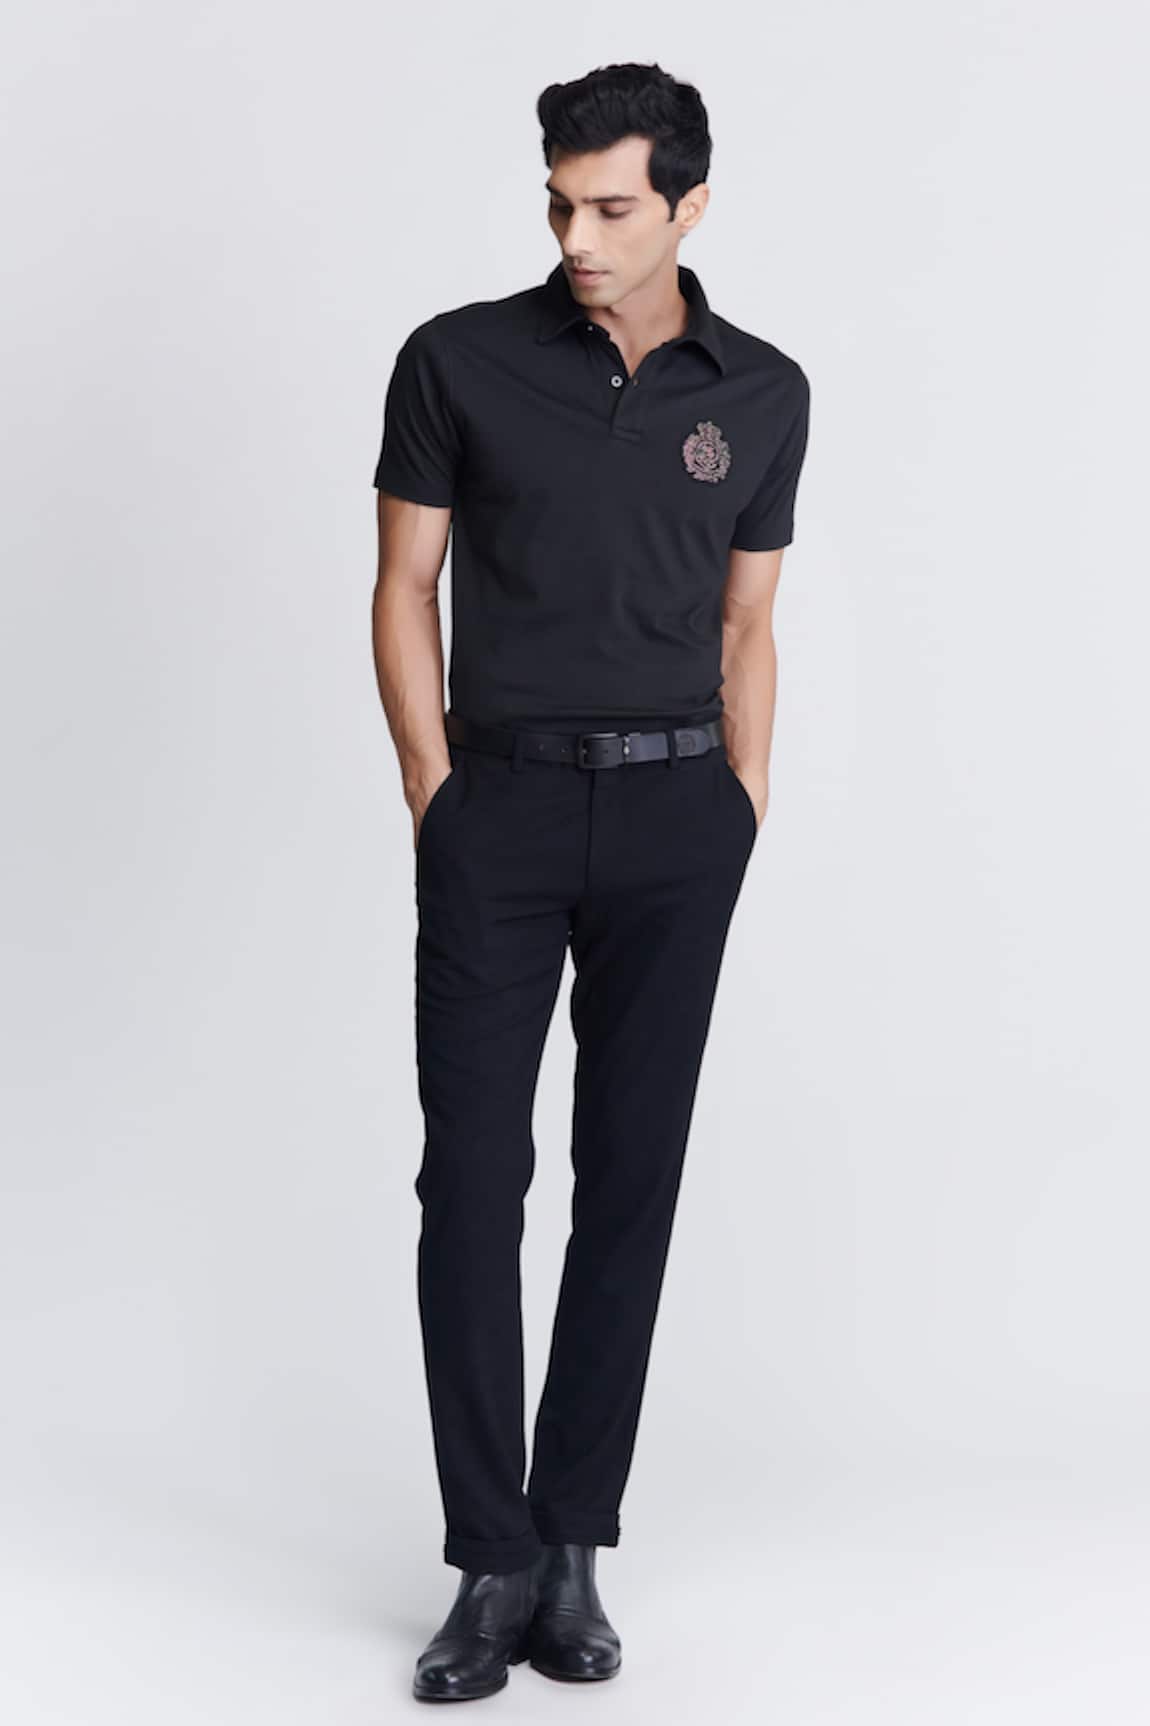 S&N by Shantnu Nikhil Crest Embroidered Polo Tee